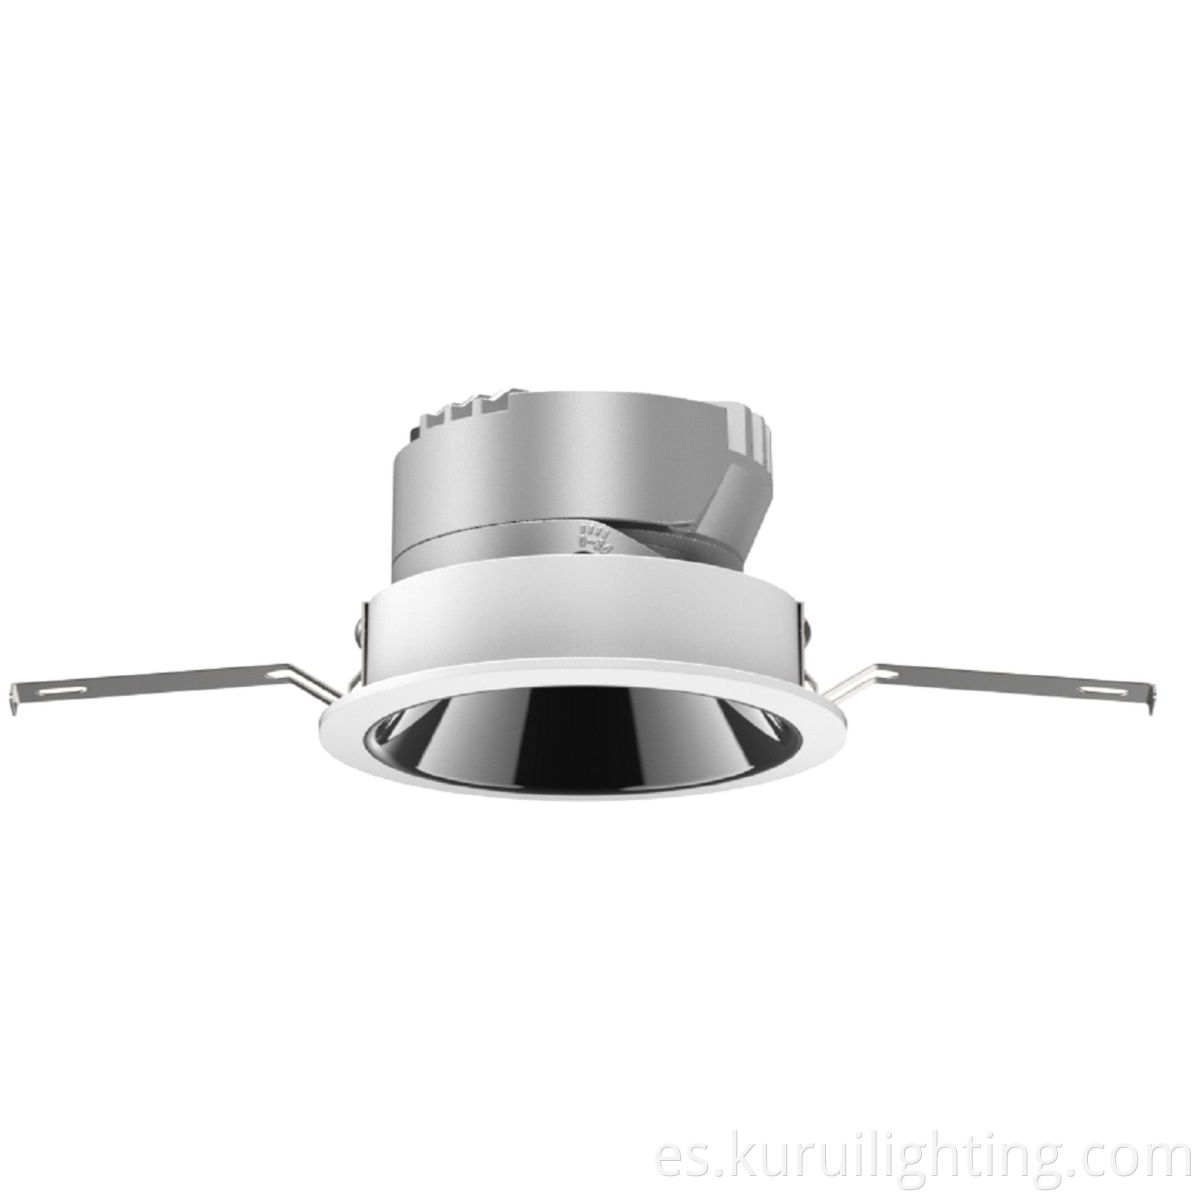 8W Recessed LED Round Hotel Downlight